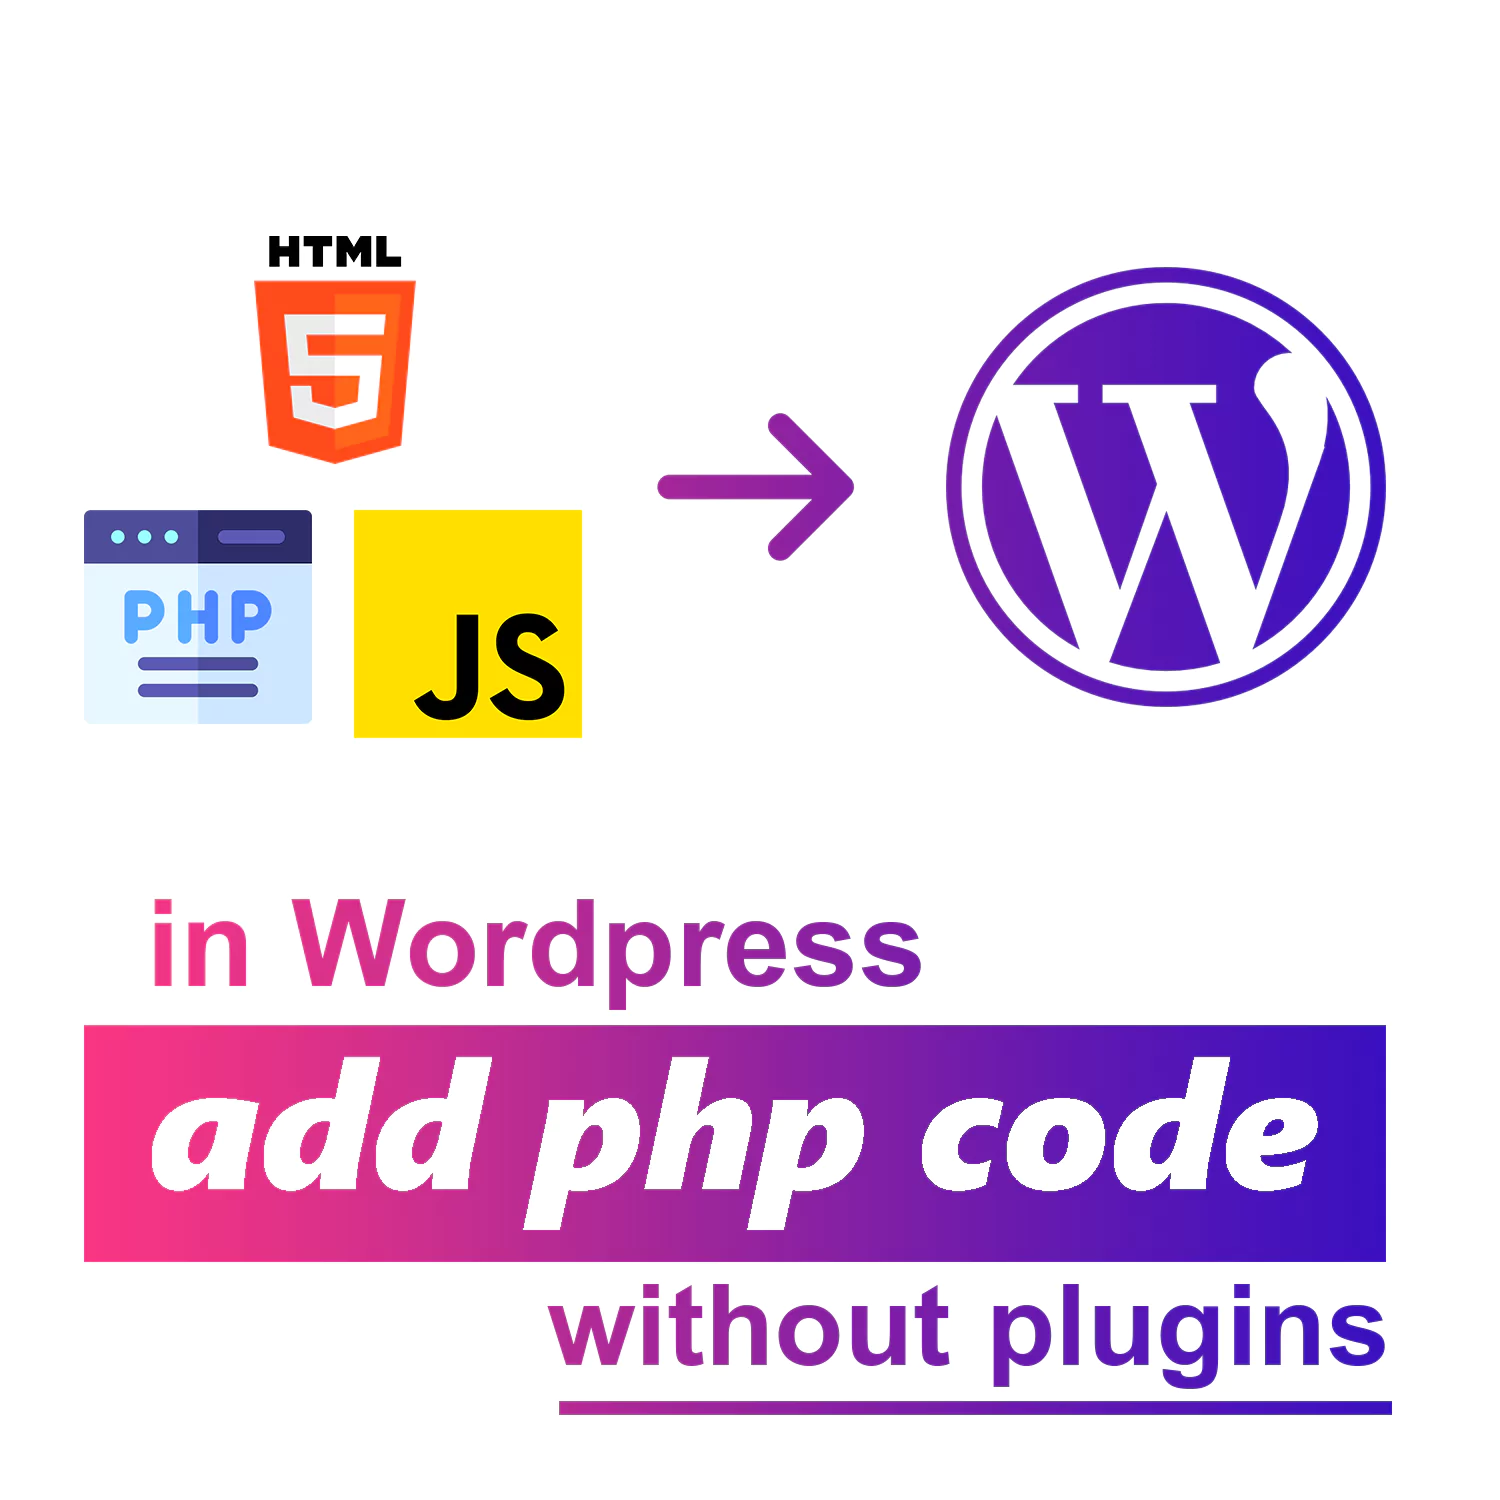 How to add PHP code in WordPress [without plugins]